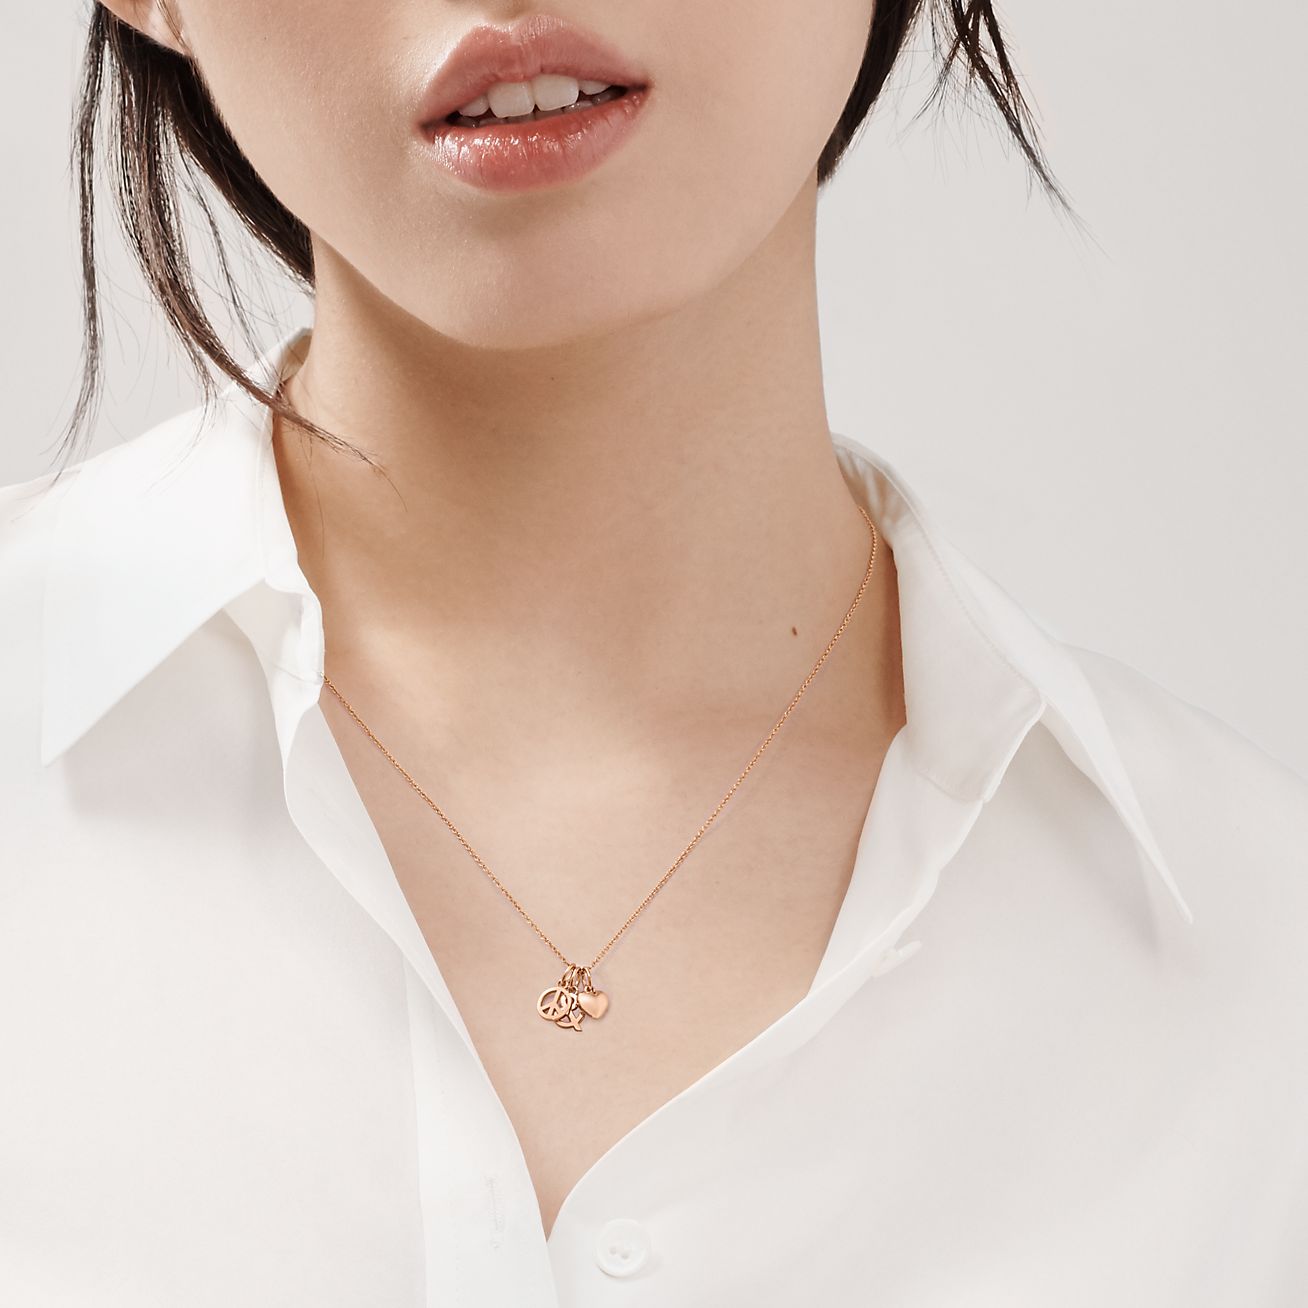 tiffany love necklace rose gold